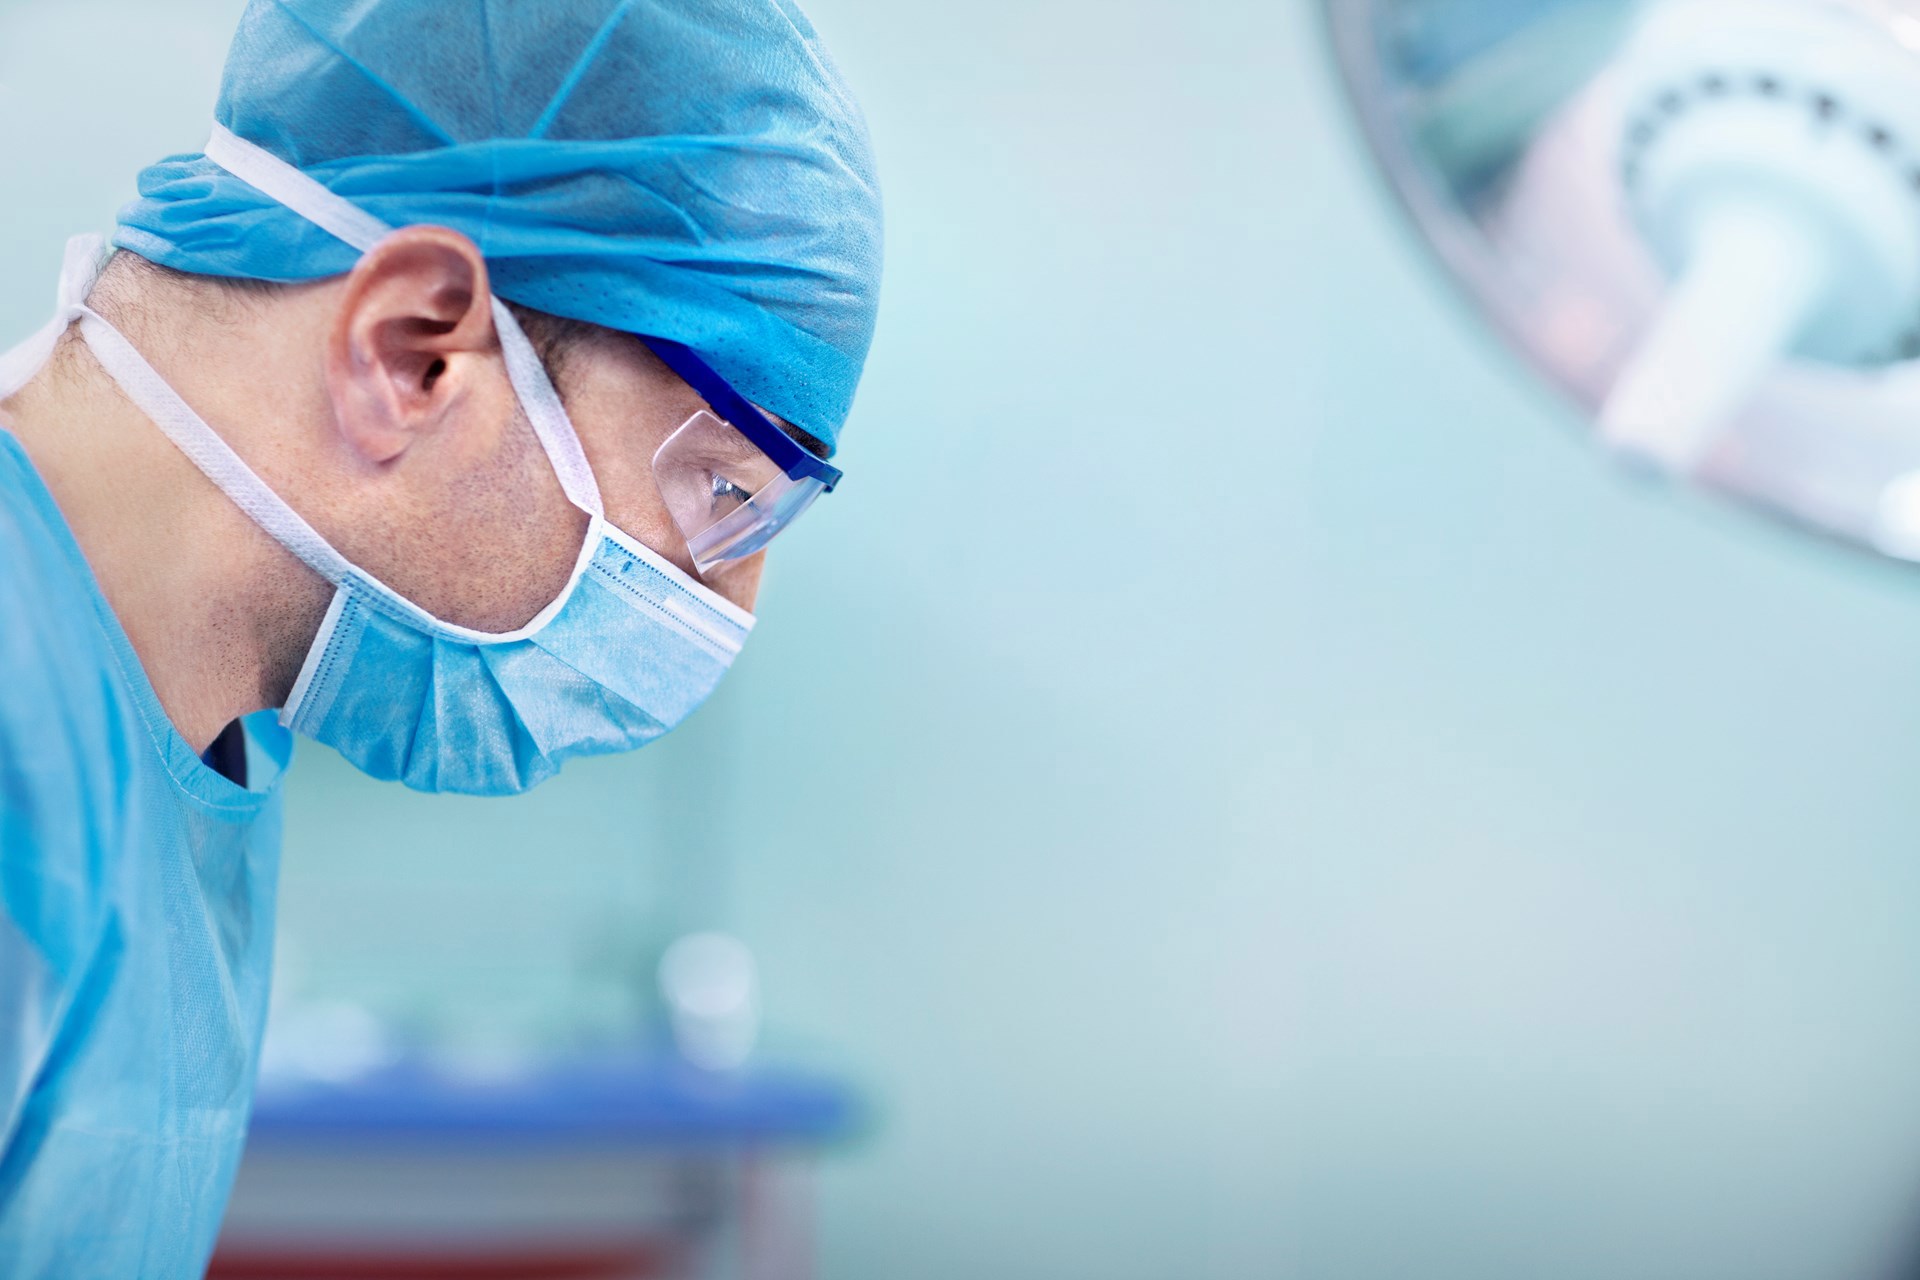 Chief Surgical Officers Are Needed in Hospitals with Complex OR Environments